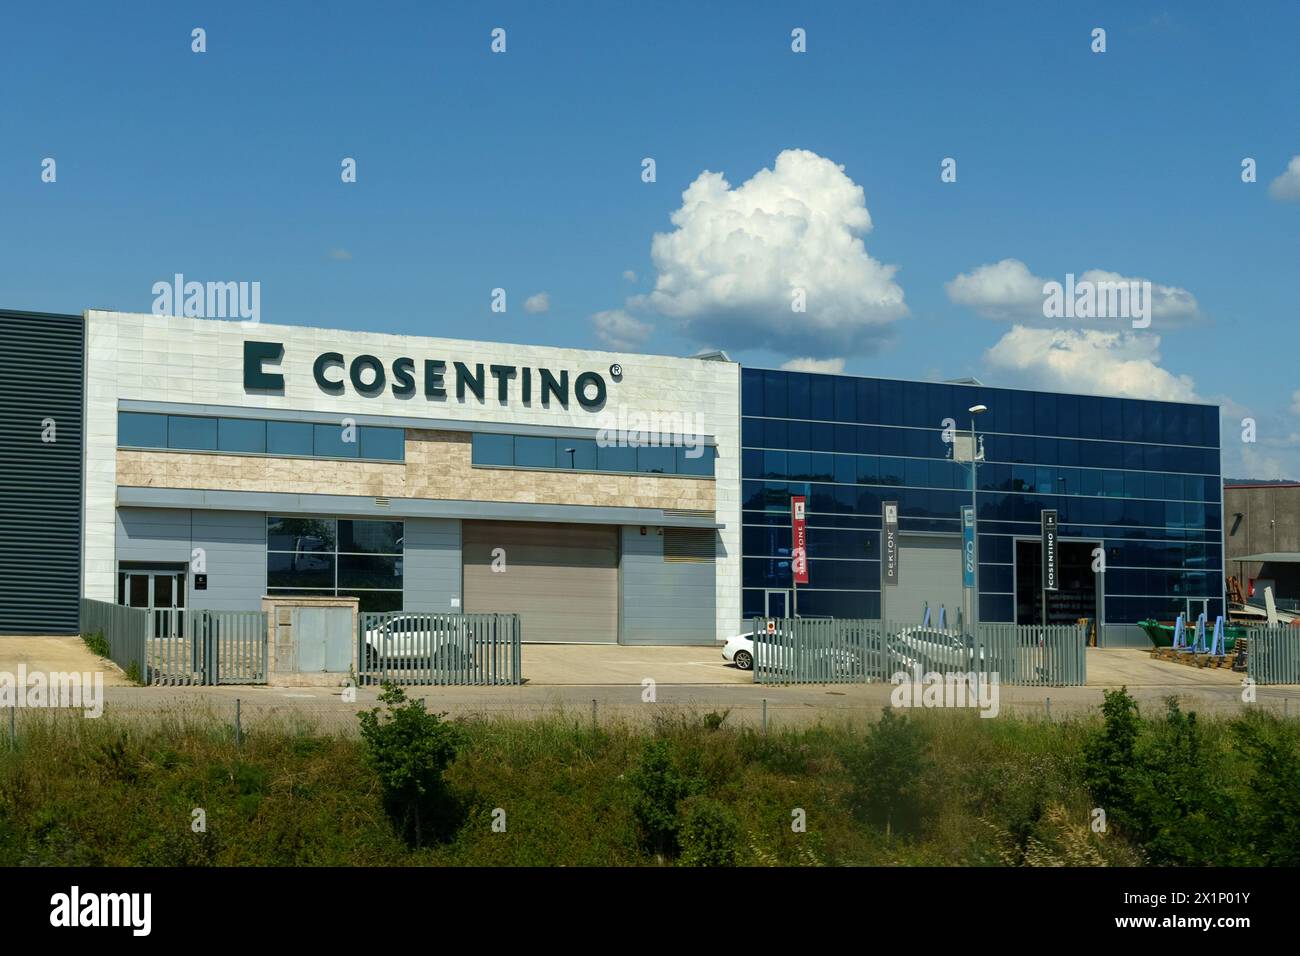 Barcelona, Spain - May 24, 2023: The modern facade of the Cosentino building with its clear signage, blue-tinted windows, and a cloud-filled sky overh Stock Photo